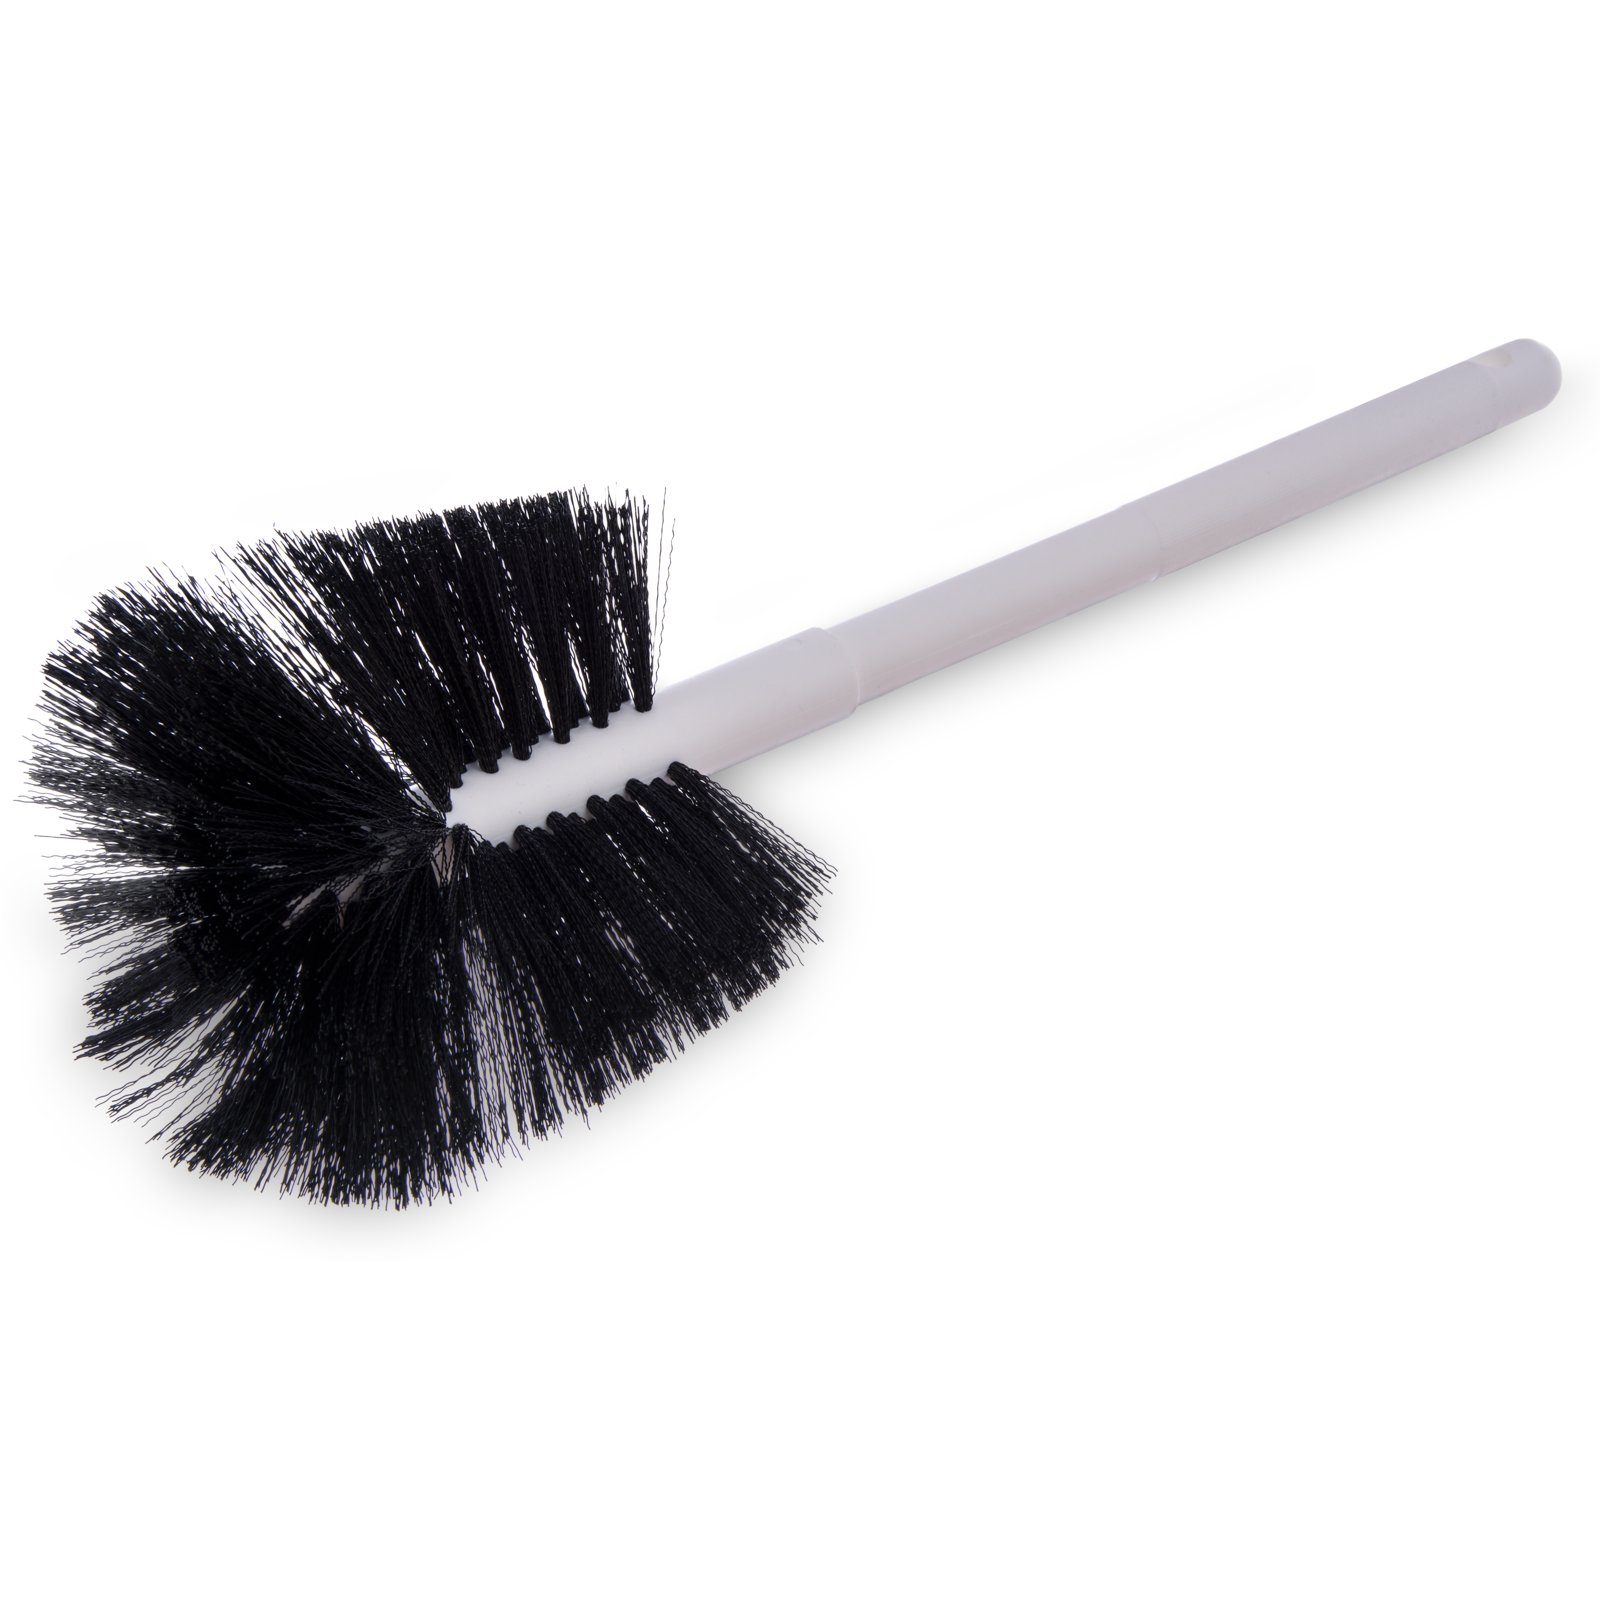 Soulhand Coffee Cleaning Brush Coffee Bar Brush Wooden Handle – soulhand